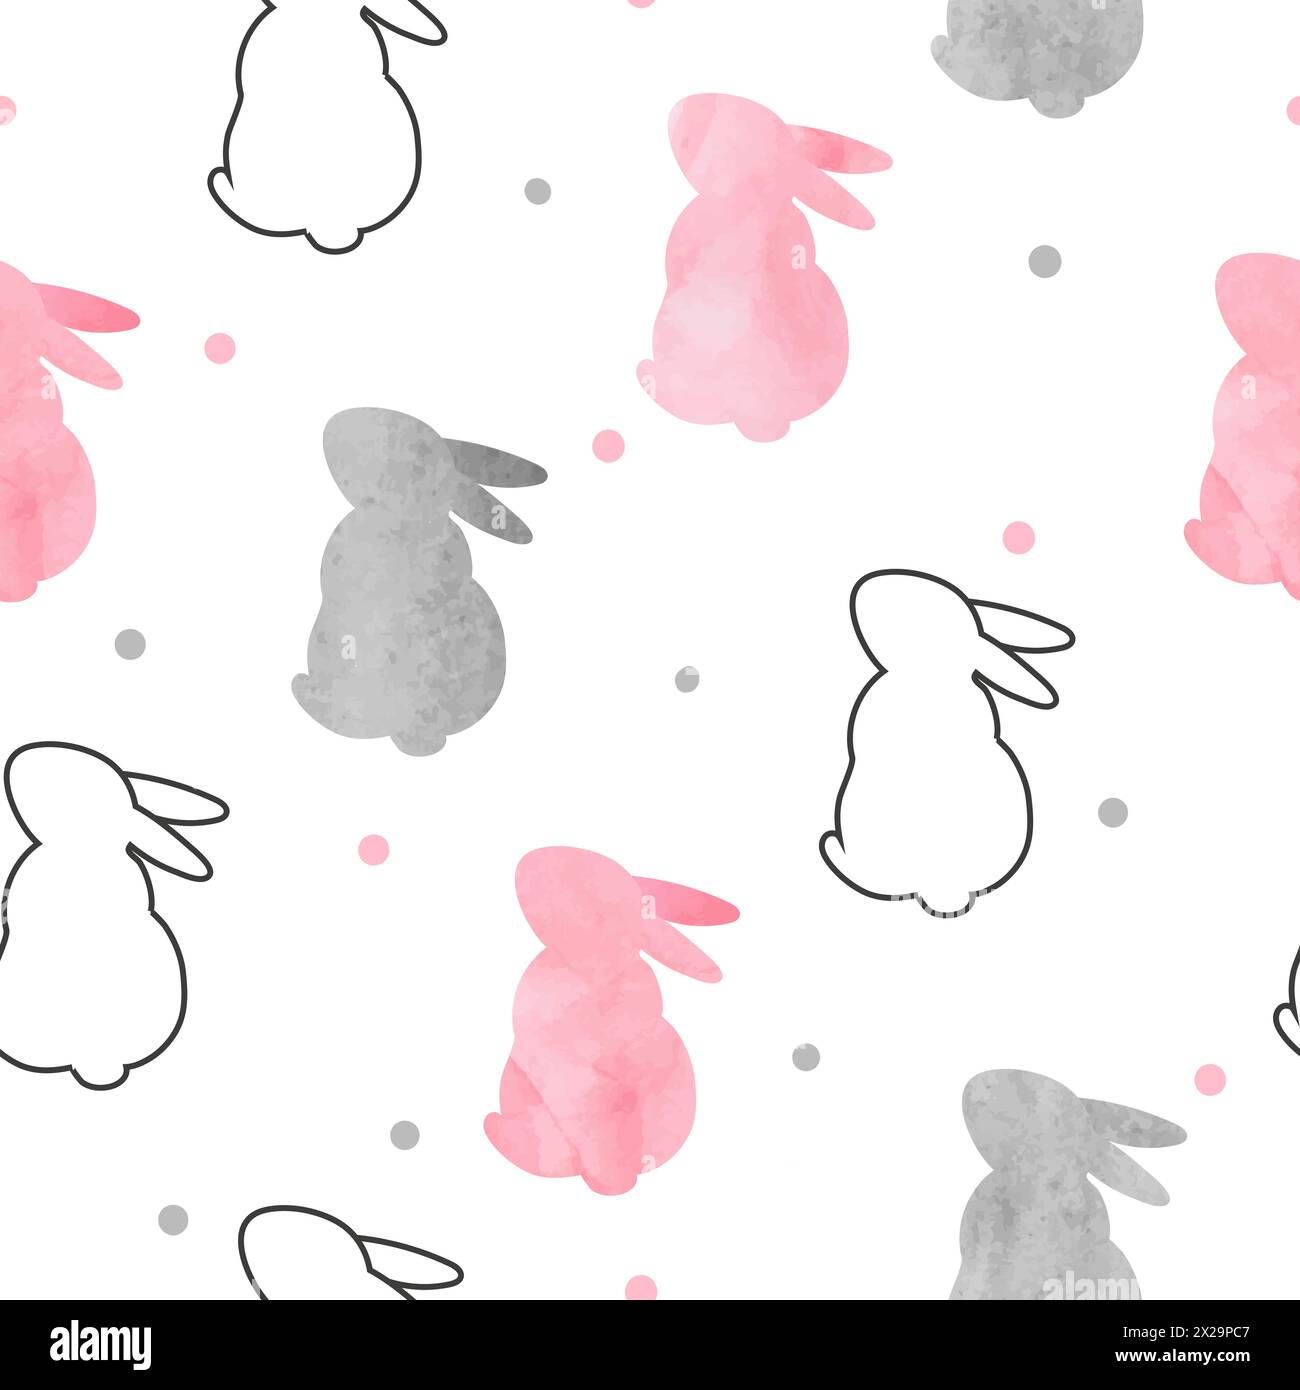 Cute bunny pattern. Seamless vector background with rabbits silhouettes Stock Vector